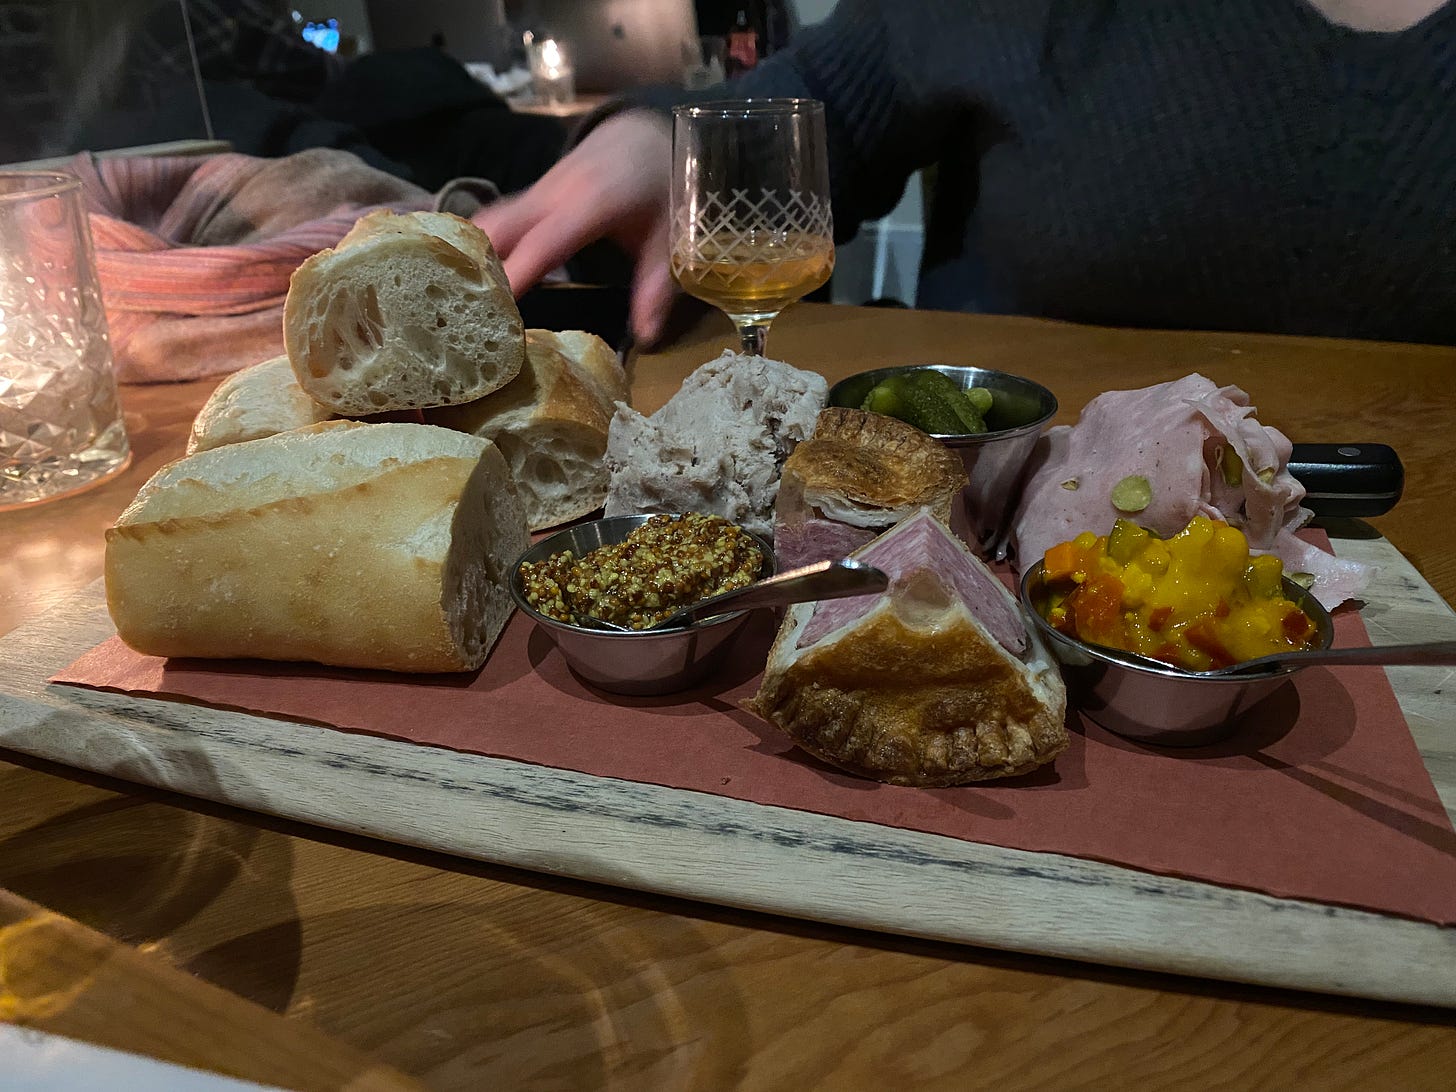 A wooden board of charcuterie: pieces of baguette, containers of mustard, pickles, and chutney, pieces of pork pie, and small piles of mortadella and duck rillettes. A candle sits to the left, and in the background is a small cocktail glass, nearly empty.